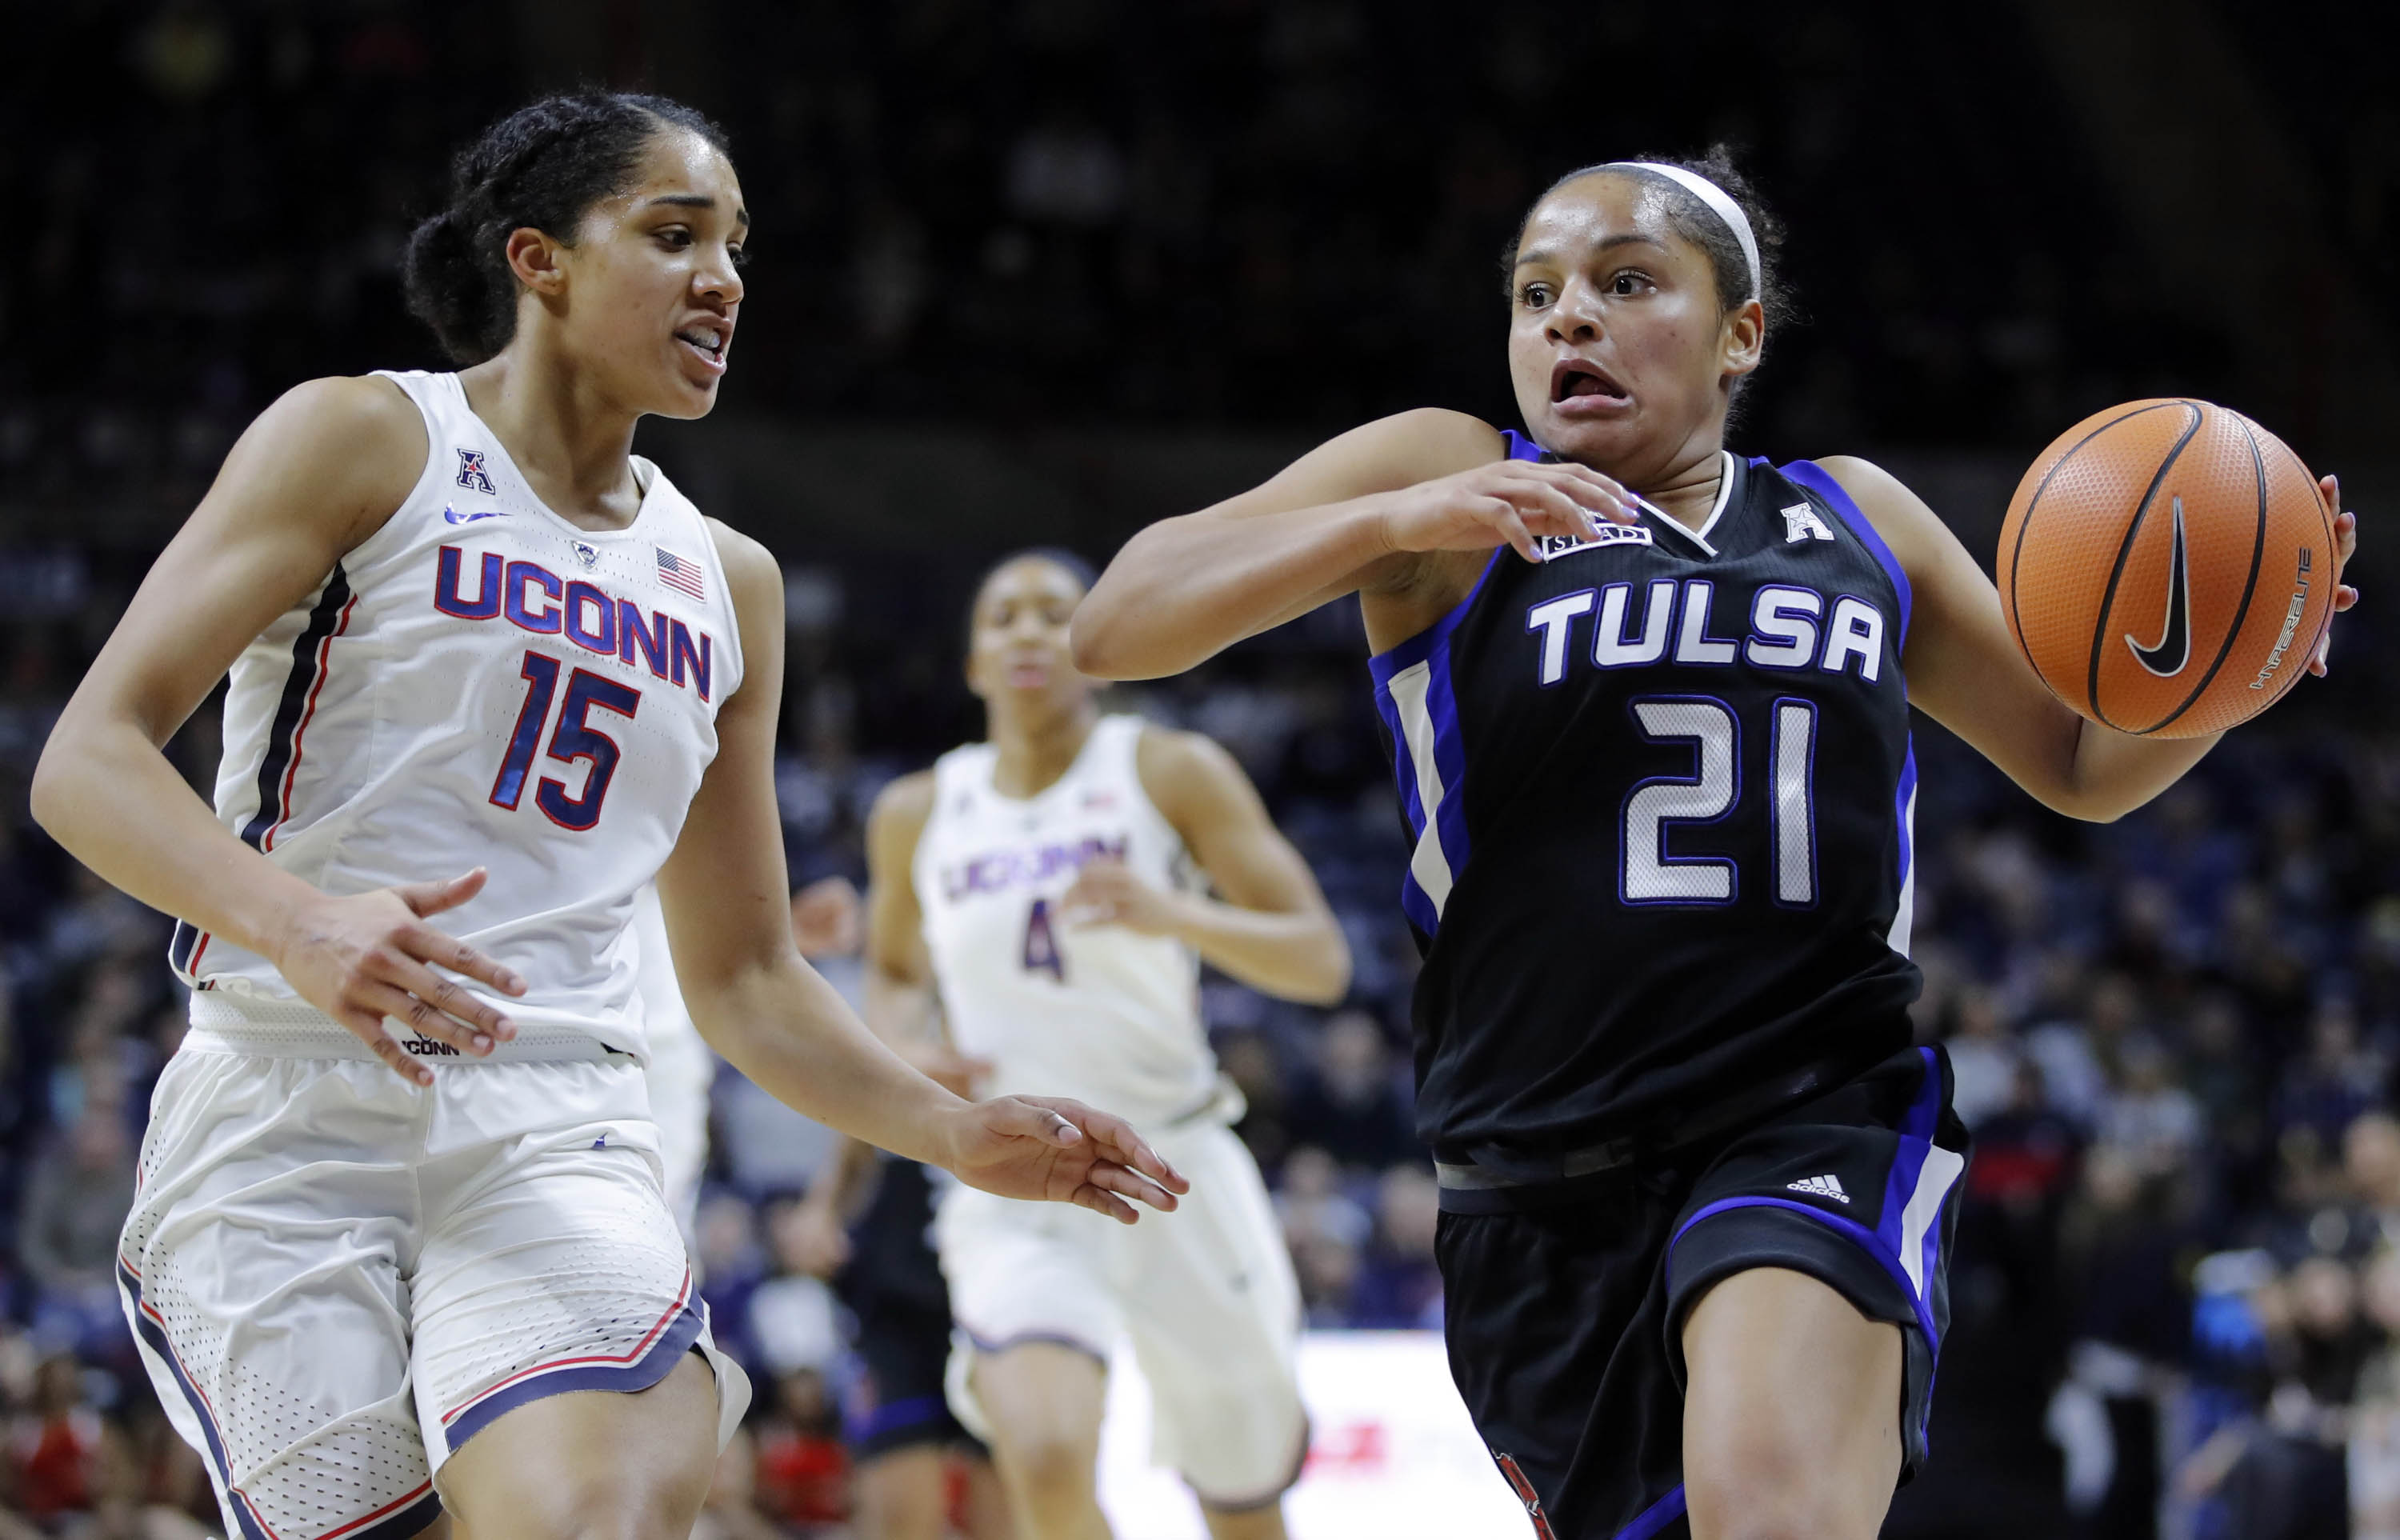 Game Primer: How To Watch, Key Facts for Tulsa at Kansas